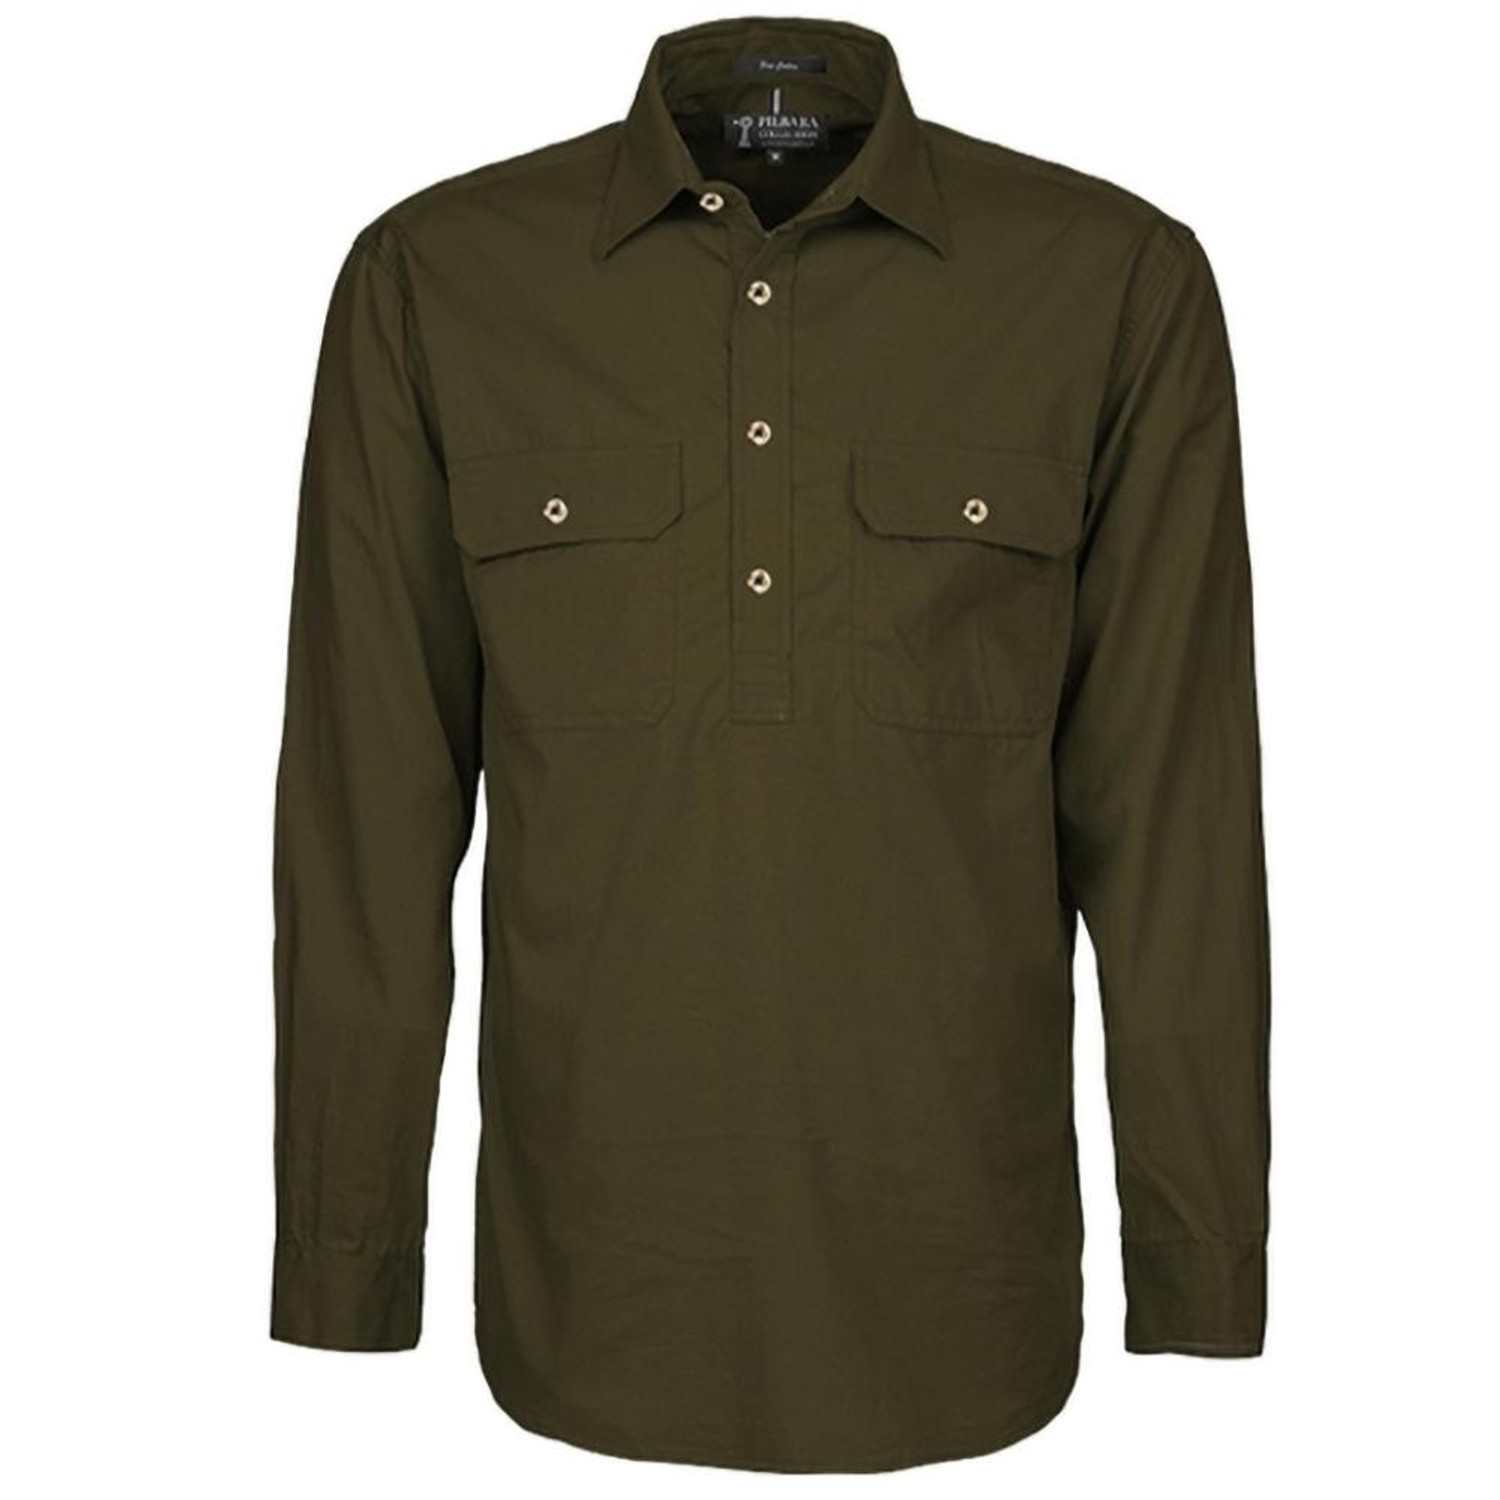 FREE EMBROIDERY - Mens Olive CLOSED FRONT Shirt buy 20